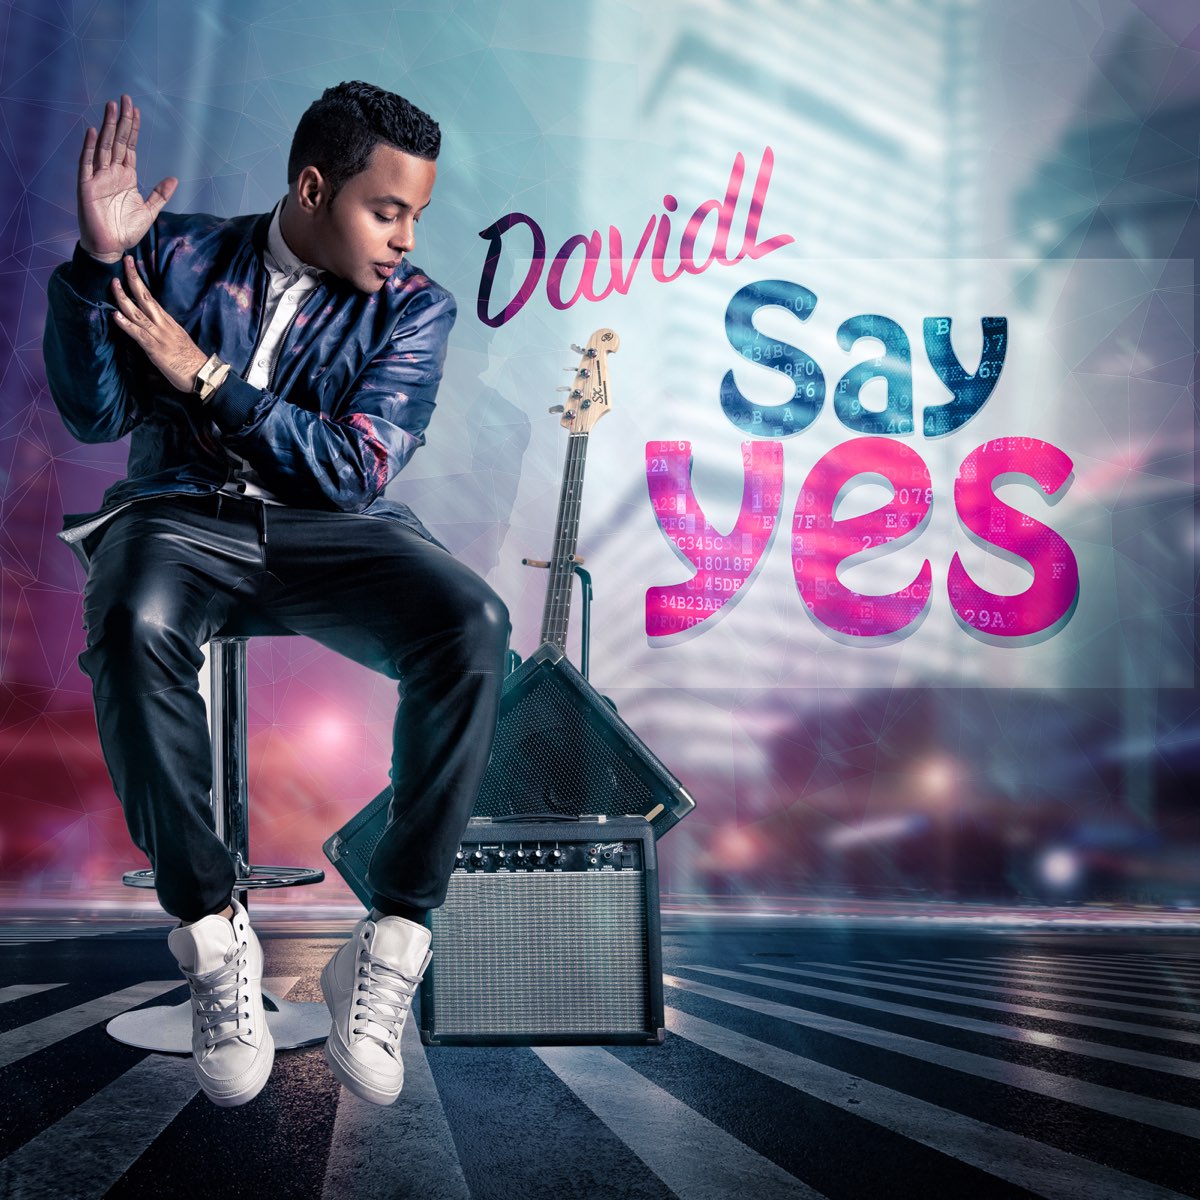 L say like. Say Yes trisguk mp3. Say Yes.